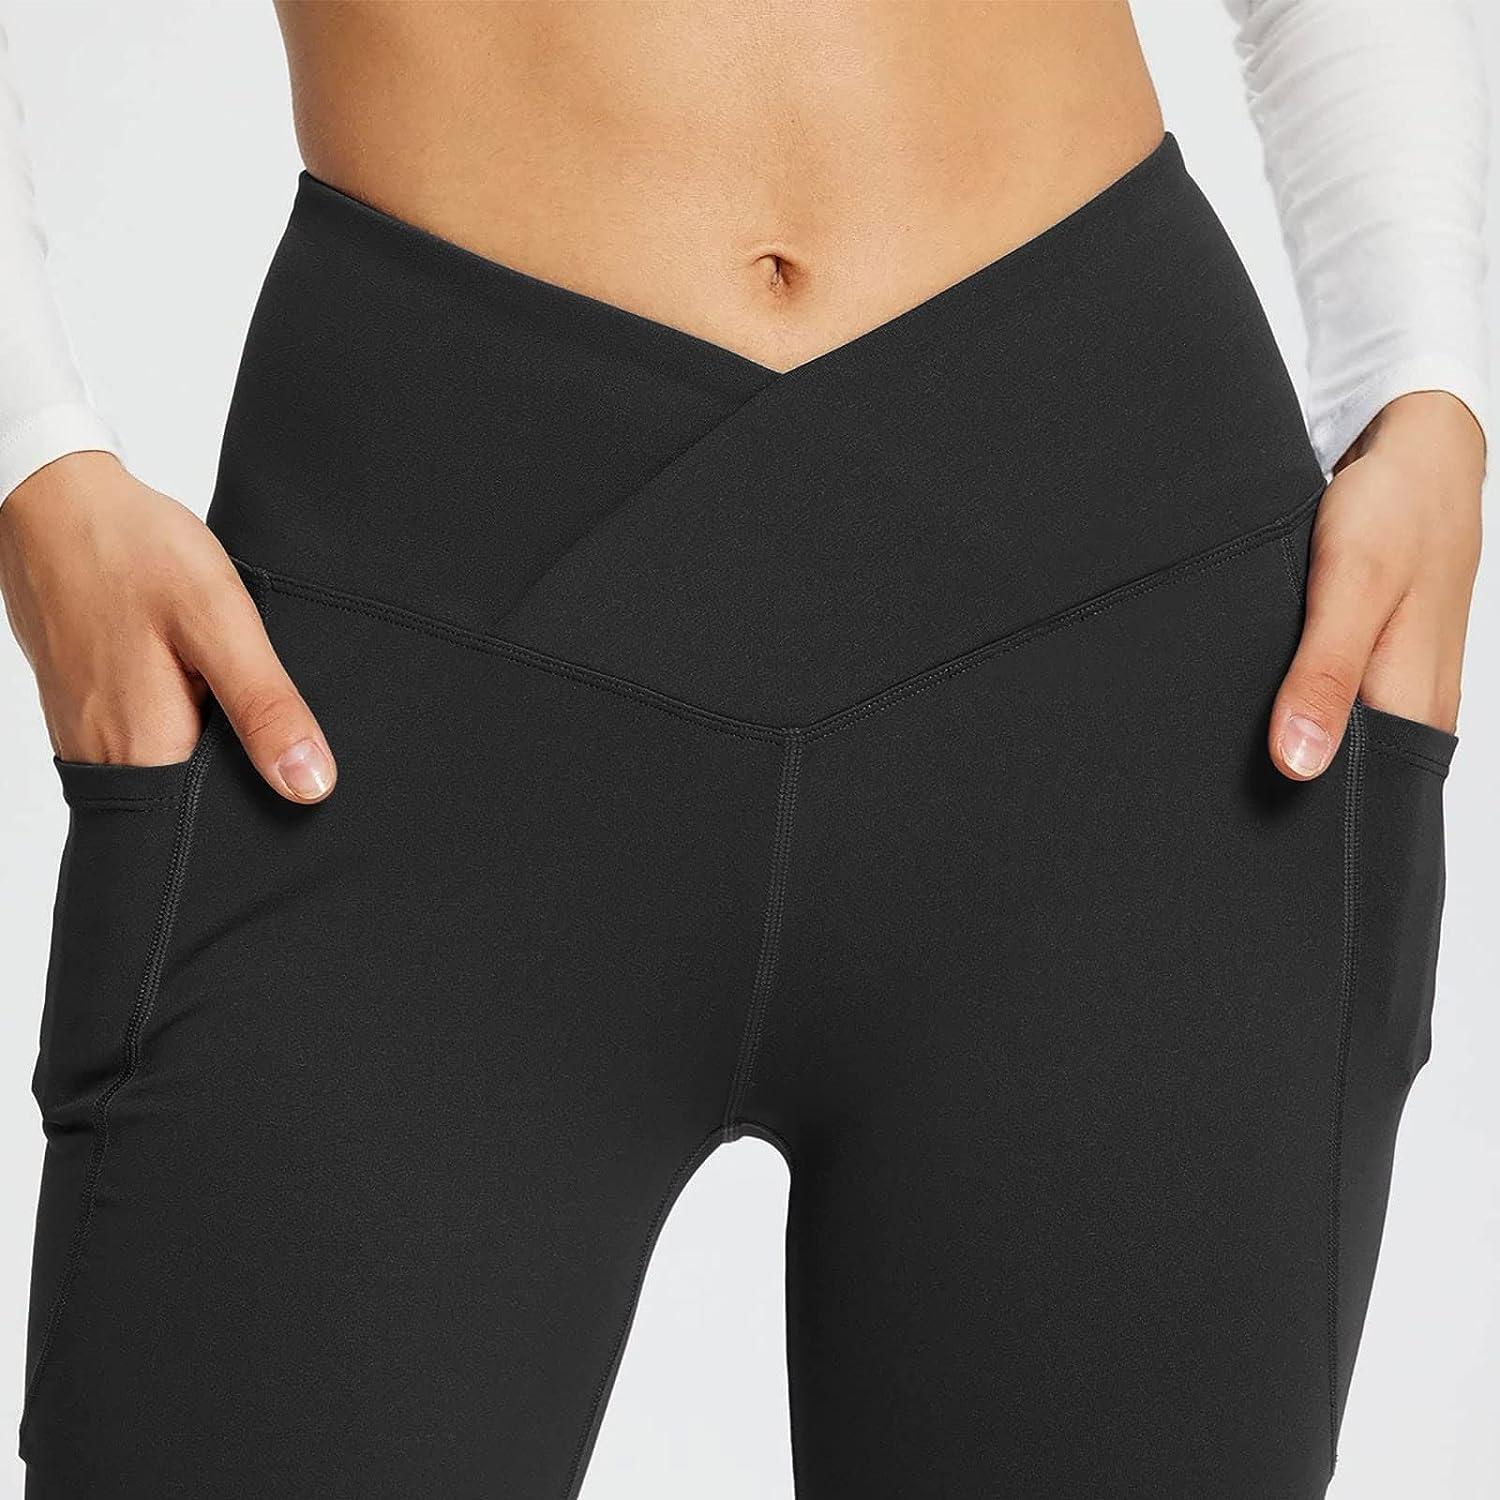 JGTDBPO Yoga Pants With Pockets For Women Casual Solid Color High